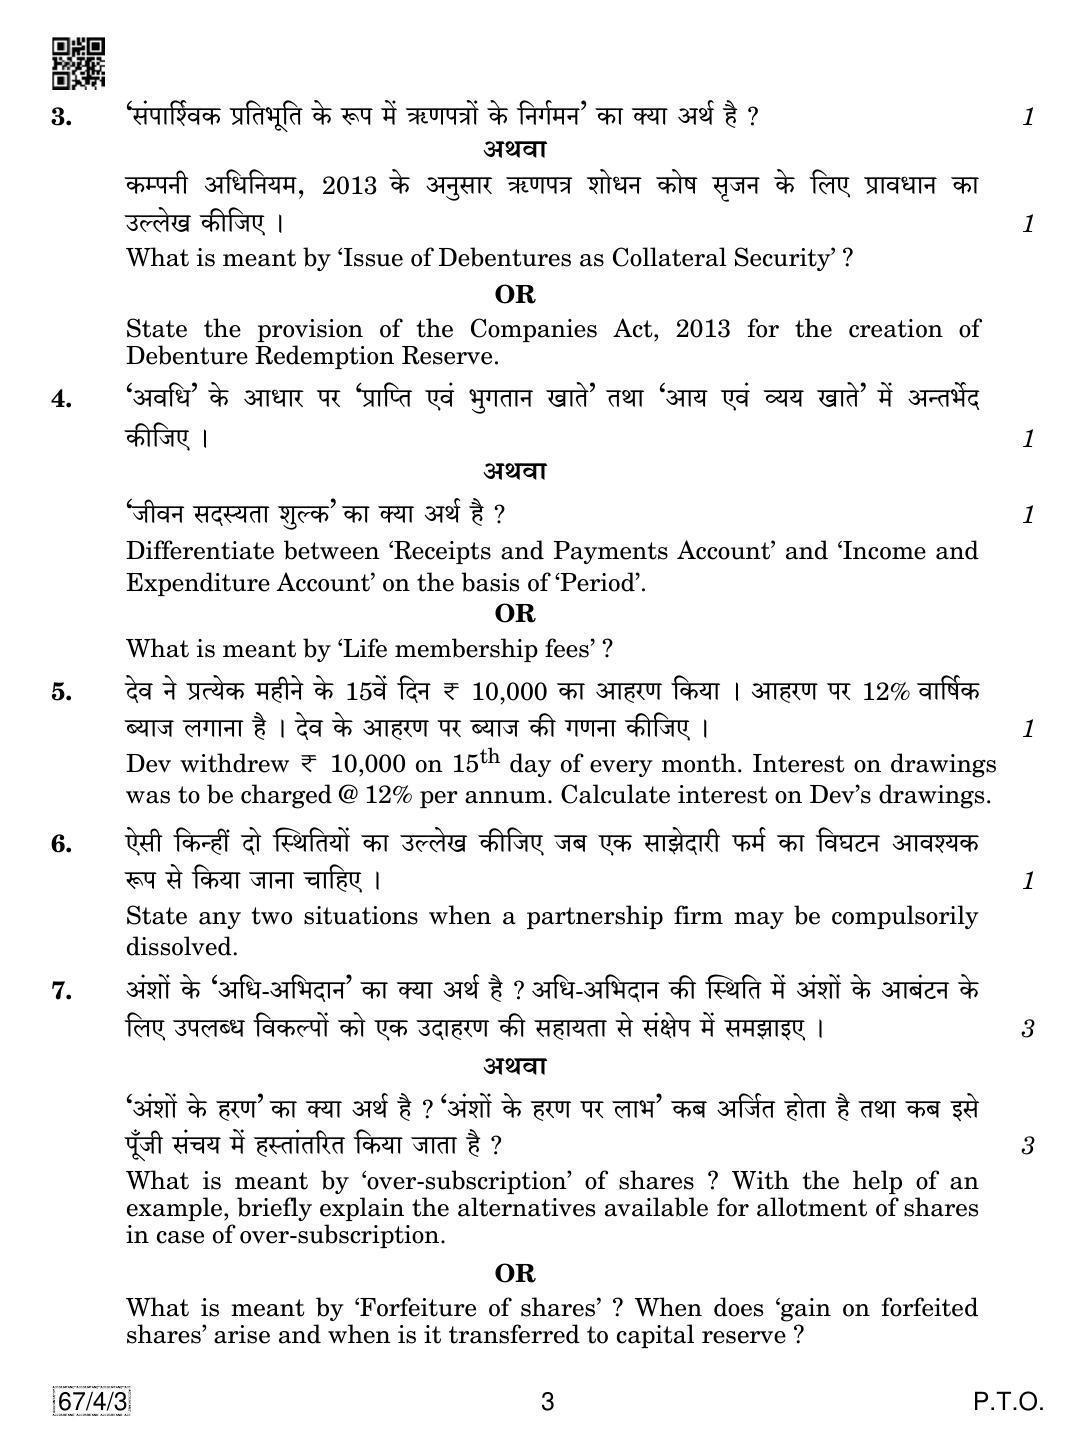 CBSE Class 12 67-4-3 Accountancy 2019 Question Paper - Page 3